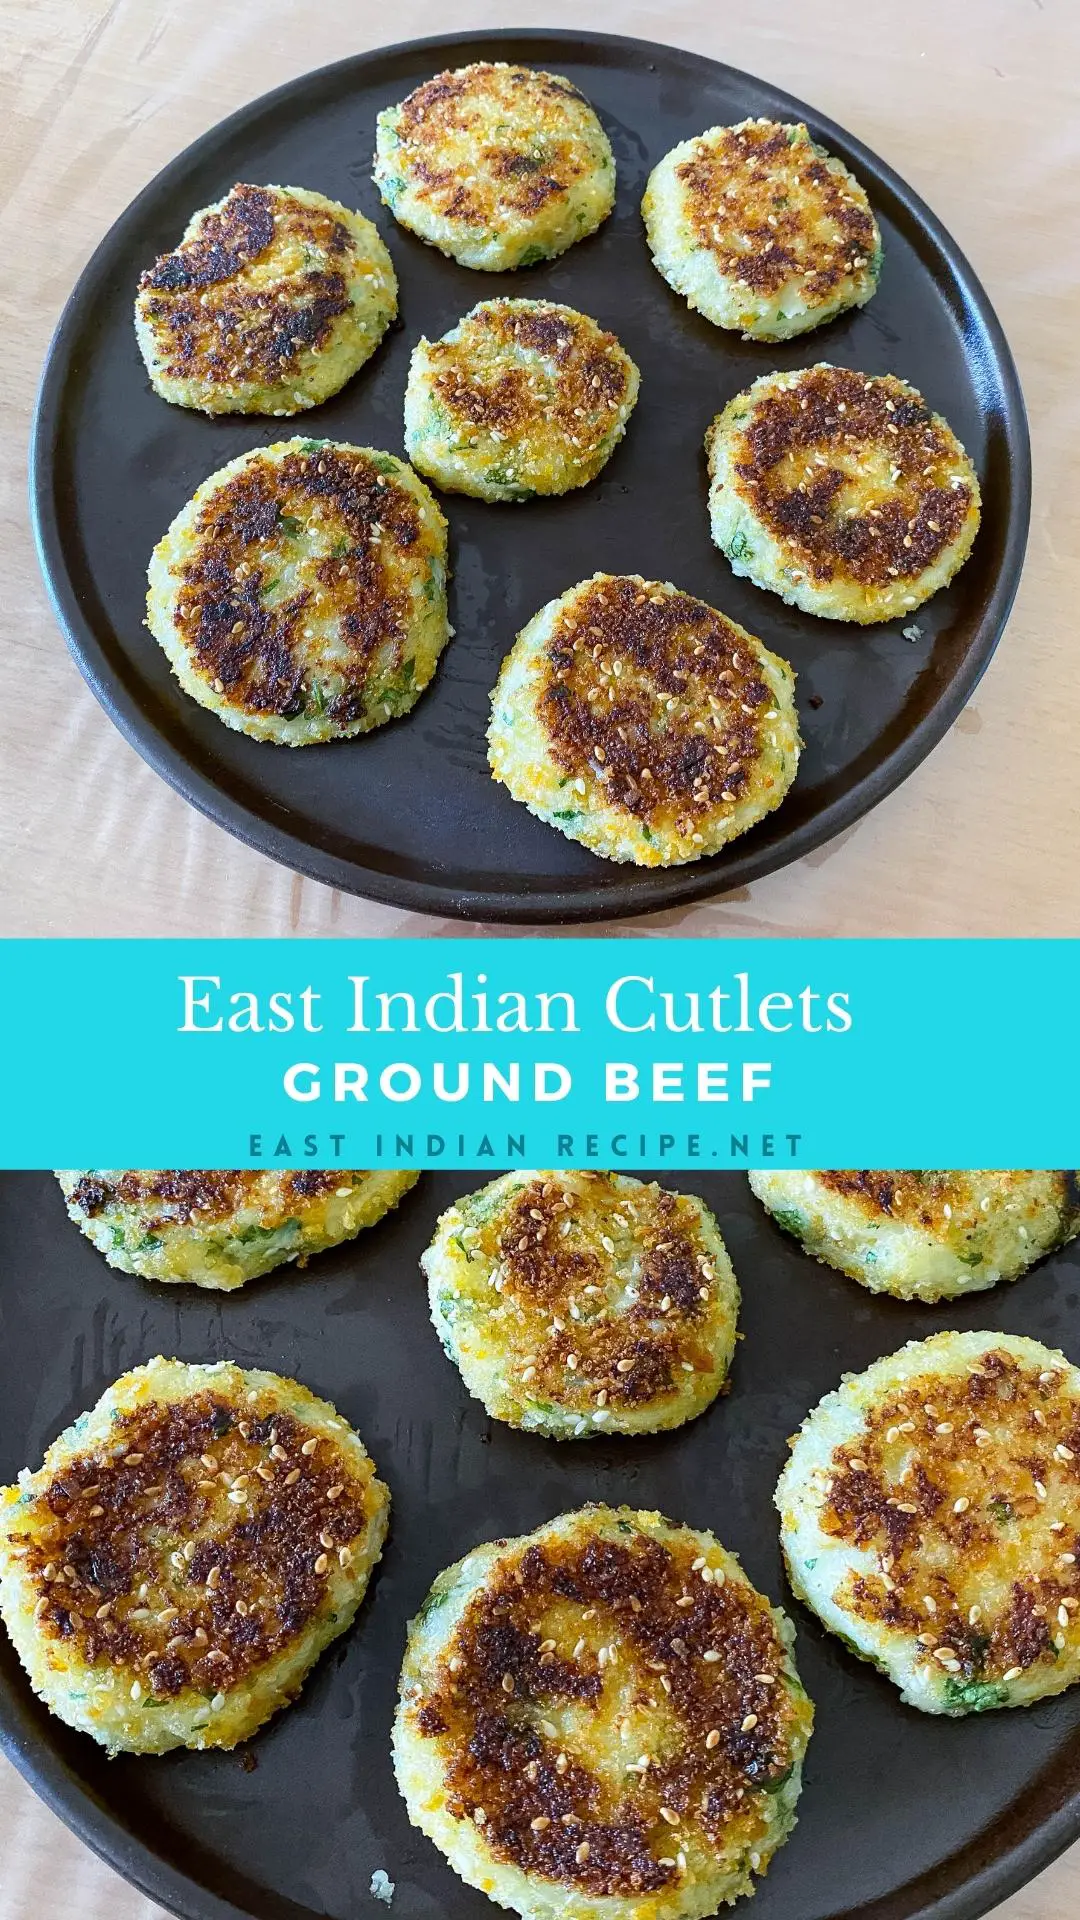 Mince Meat Cutlets - Ground Beef Patties - East Indian Recipes